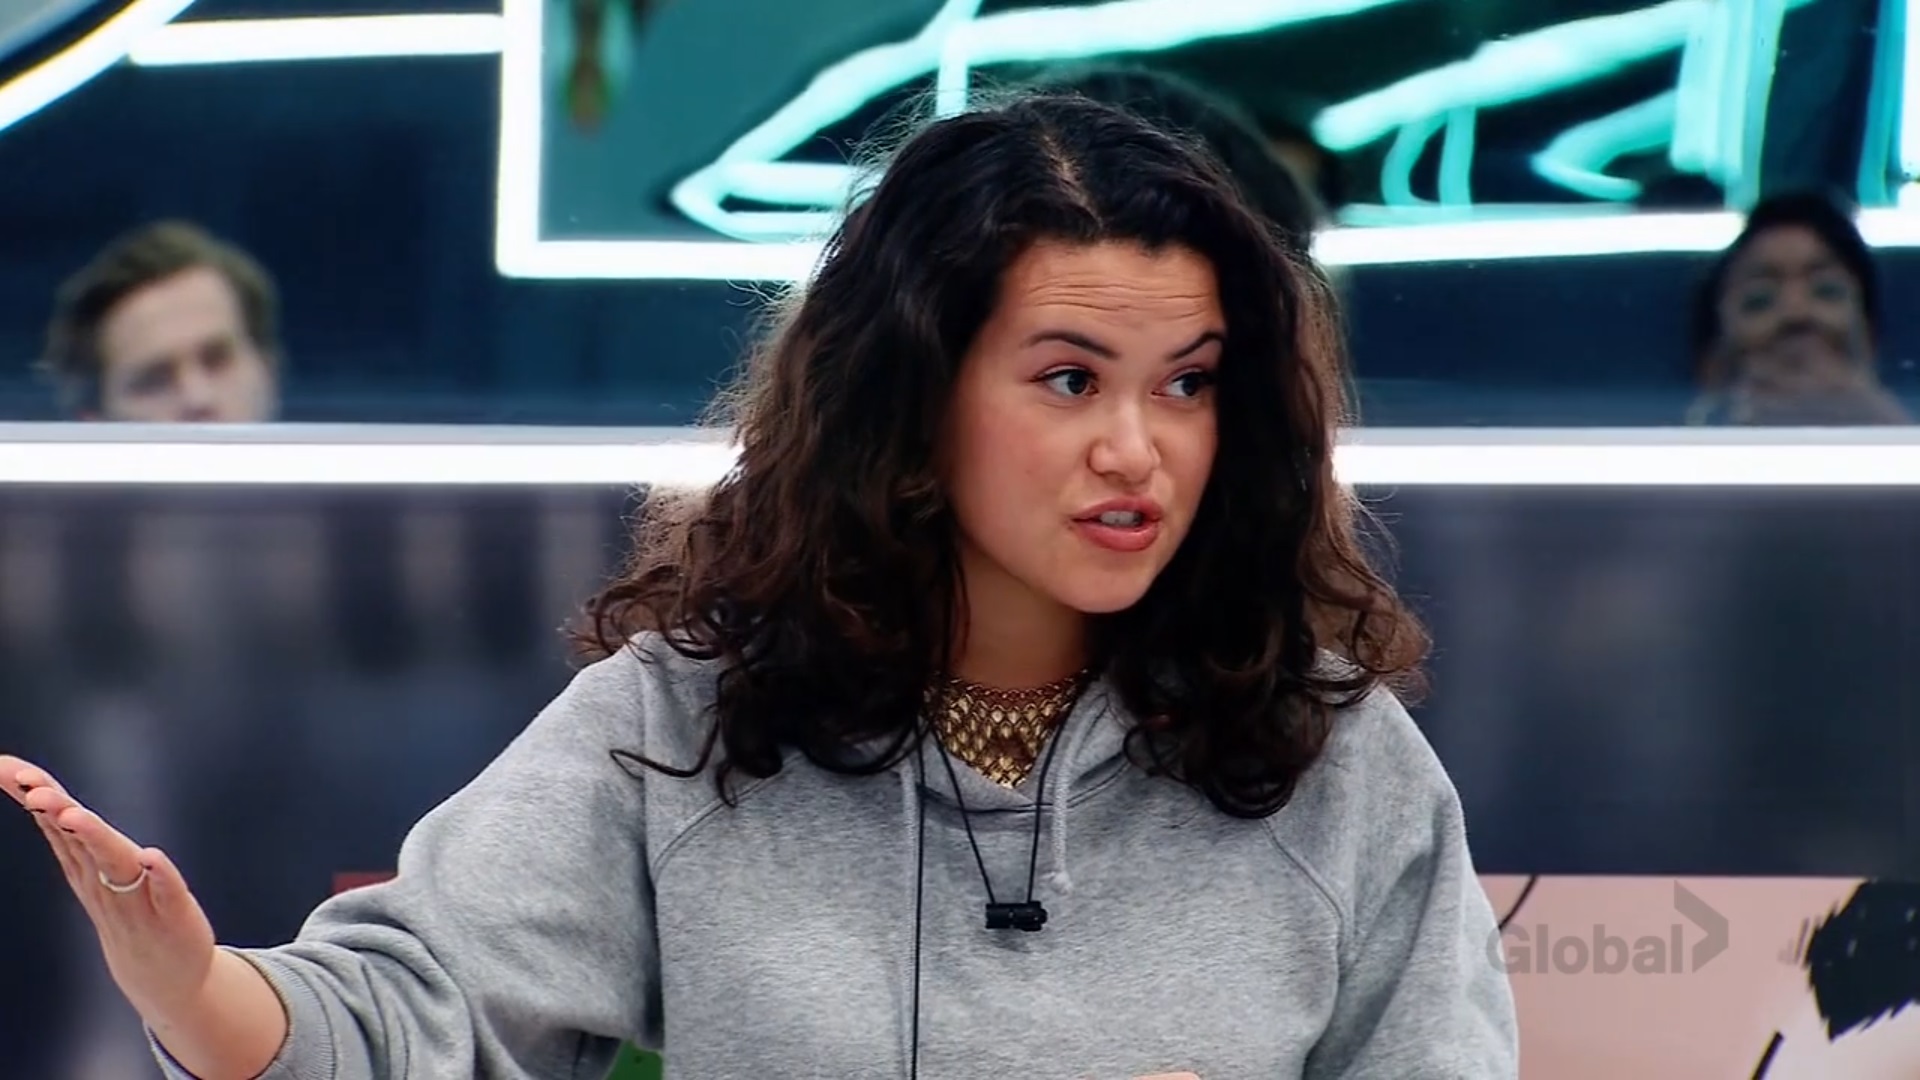 Minh-Ly hosting the house meeting on Big Brother Canada 8